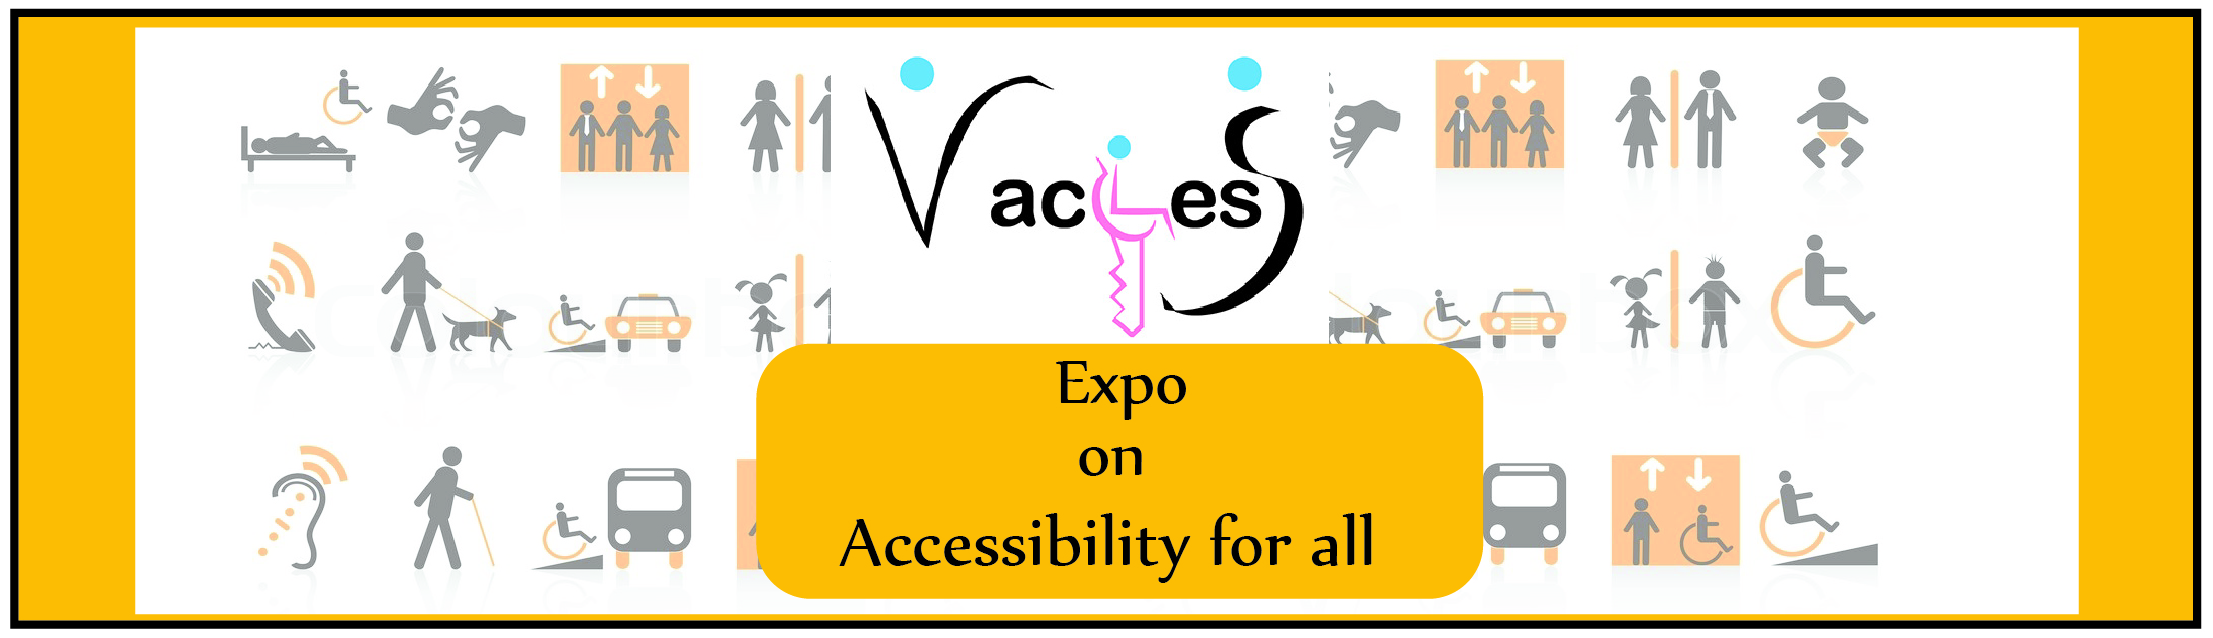 vaccess expo on accessibility for all banner